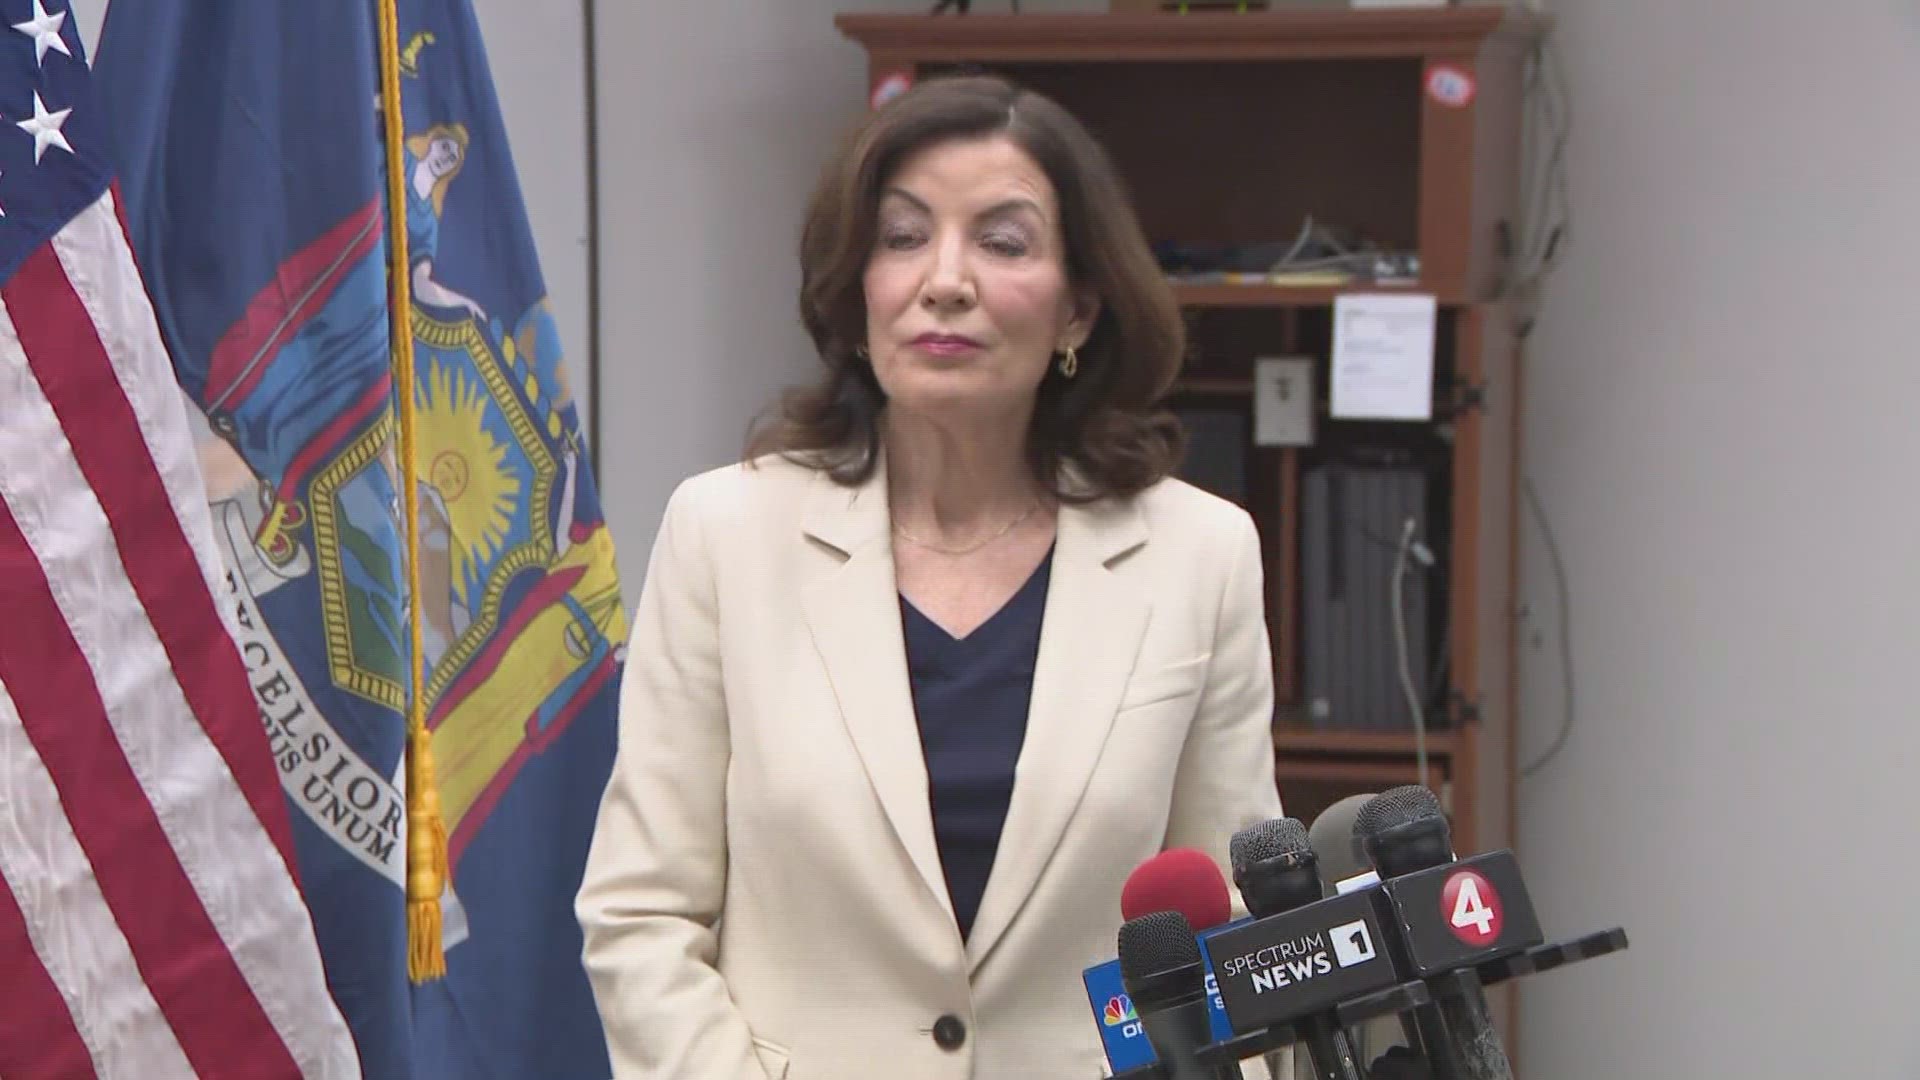 Gov. Hochul discusses the shortage of labor in WNY, NYS